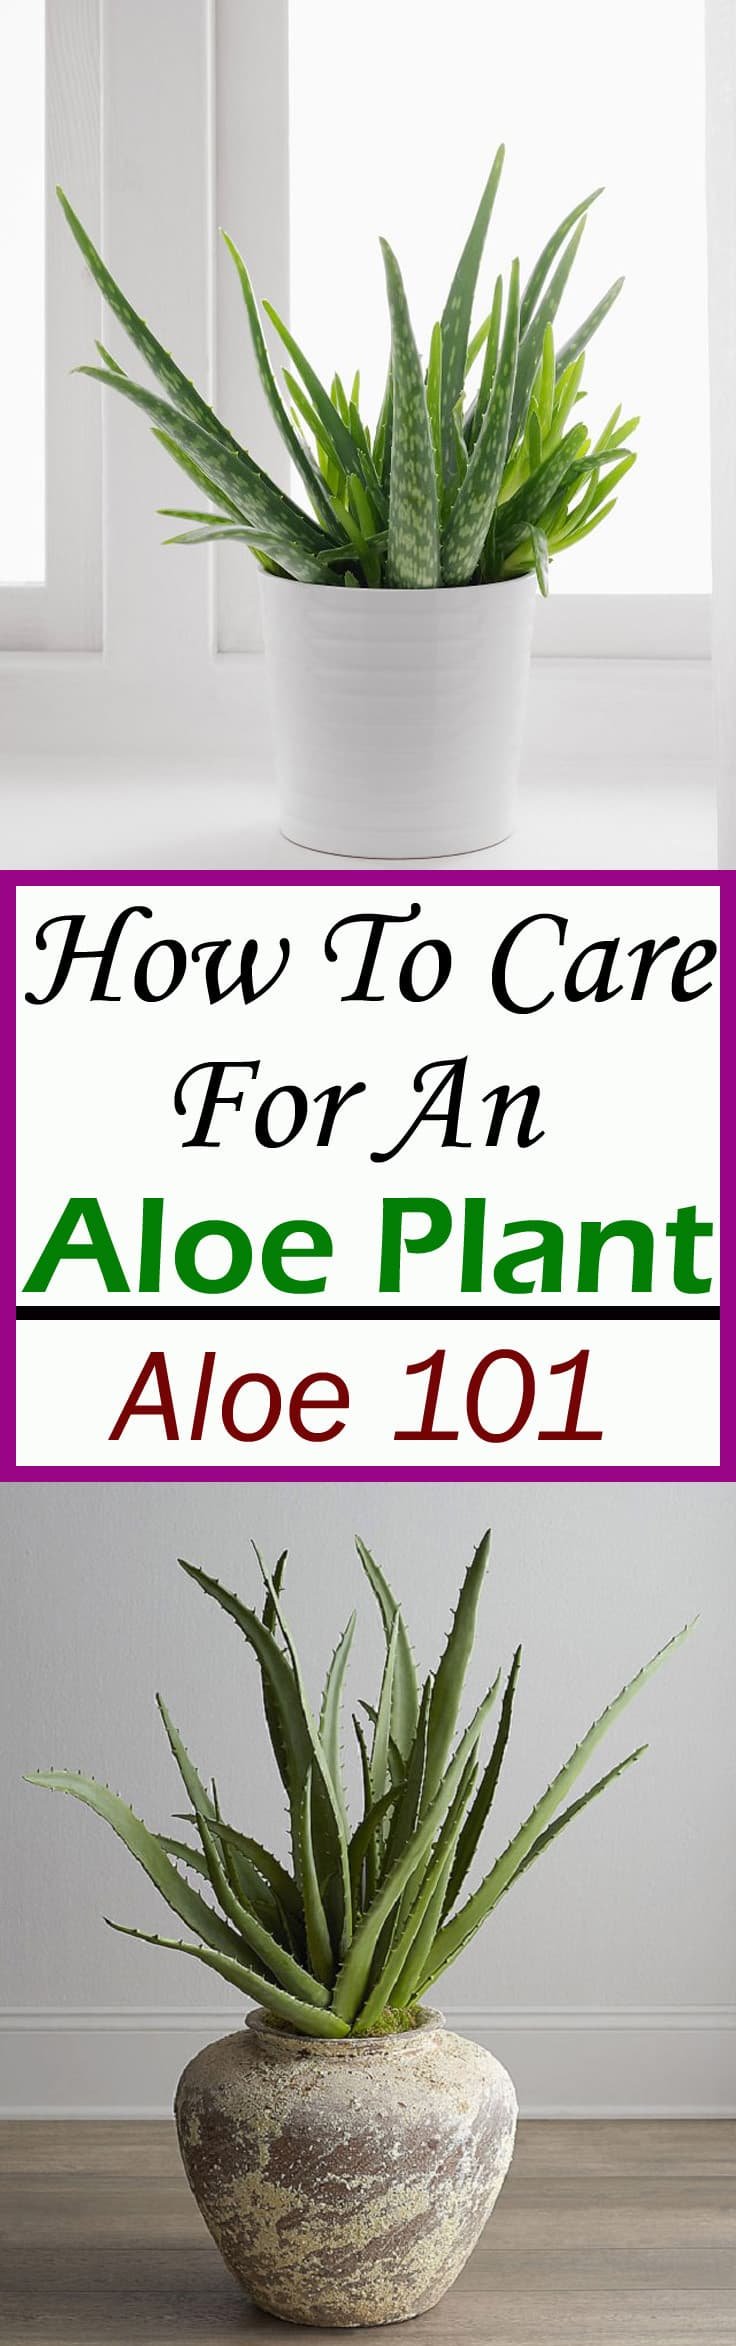 Aloe plant care is easy, learn how to care for it in this short guide and imply the tips.